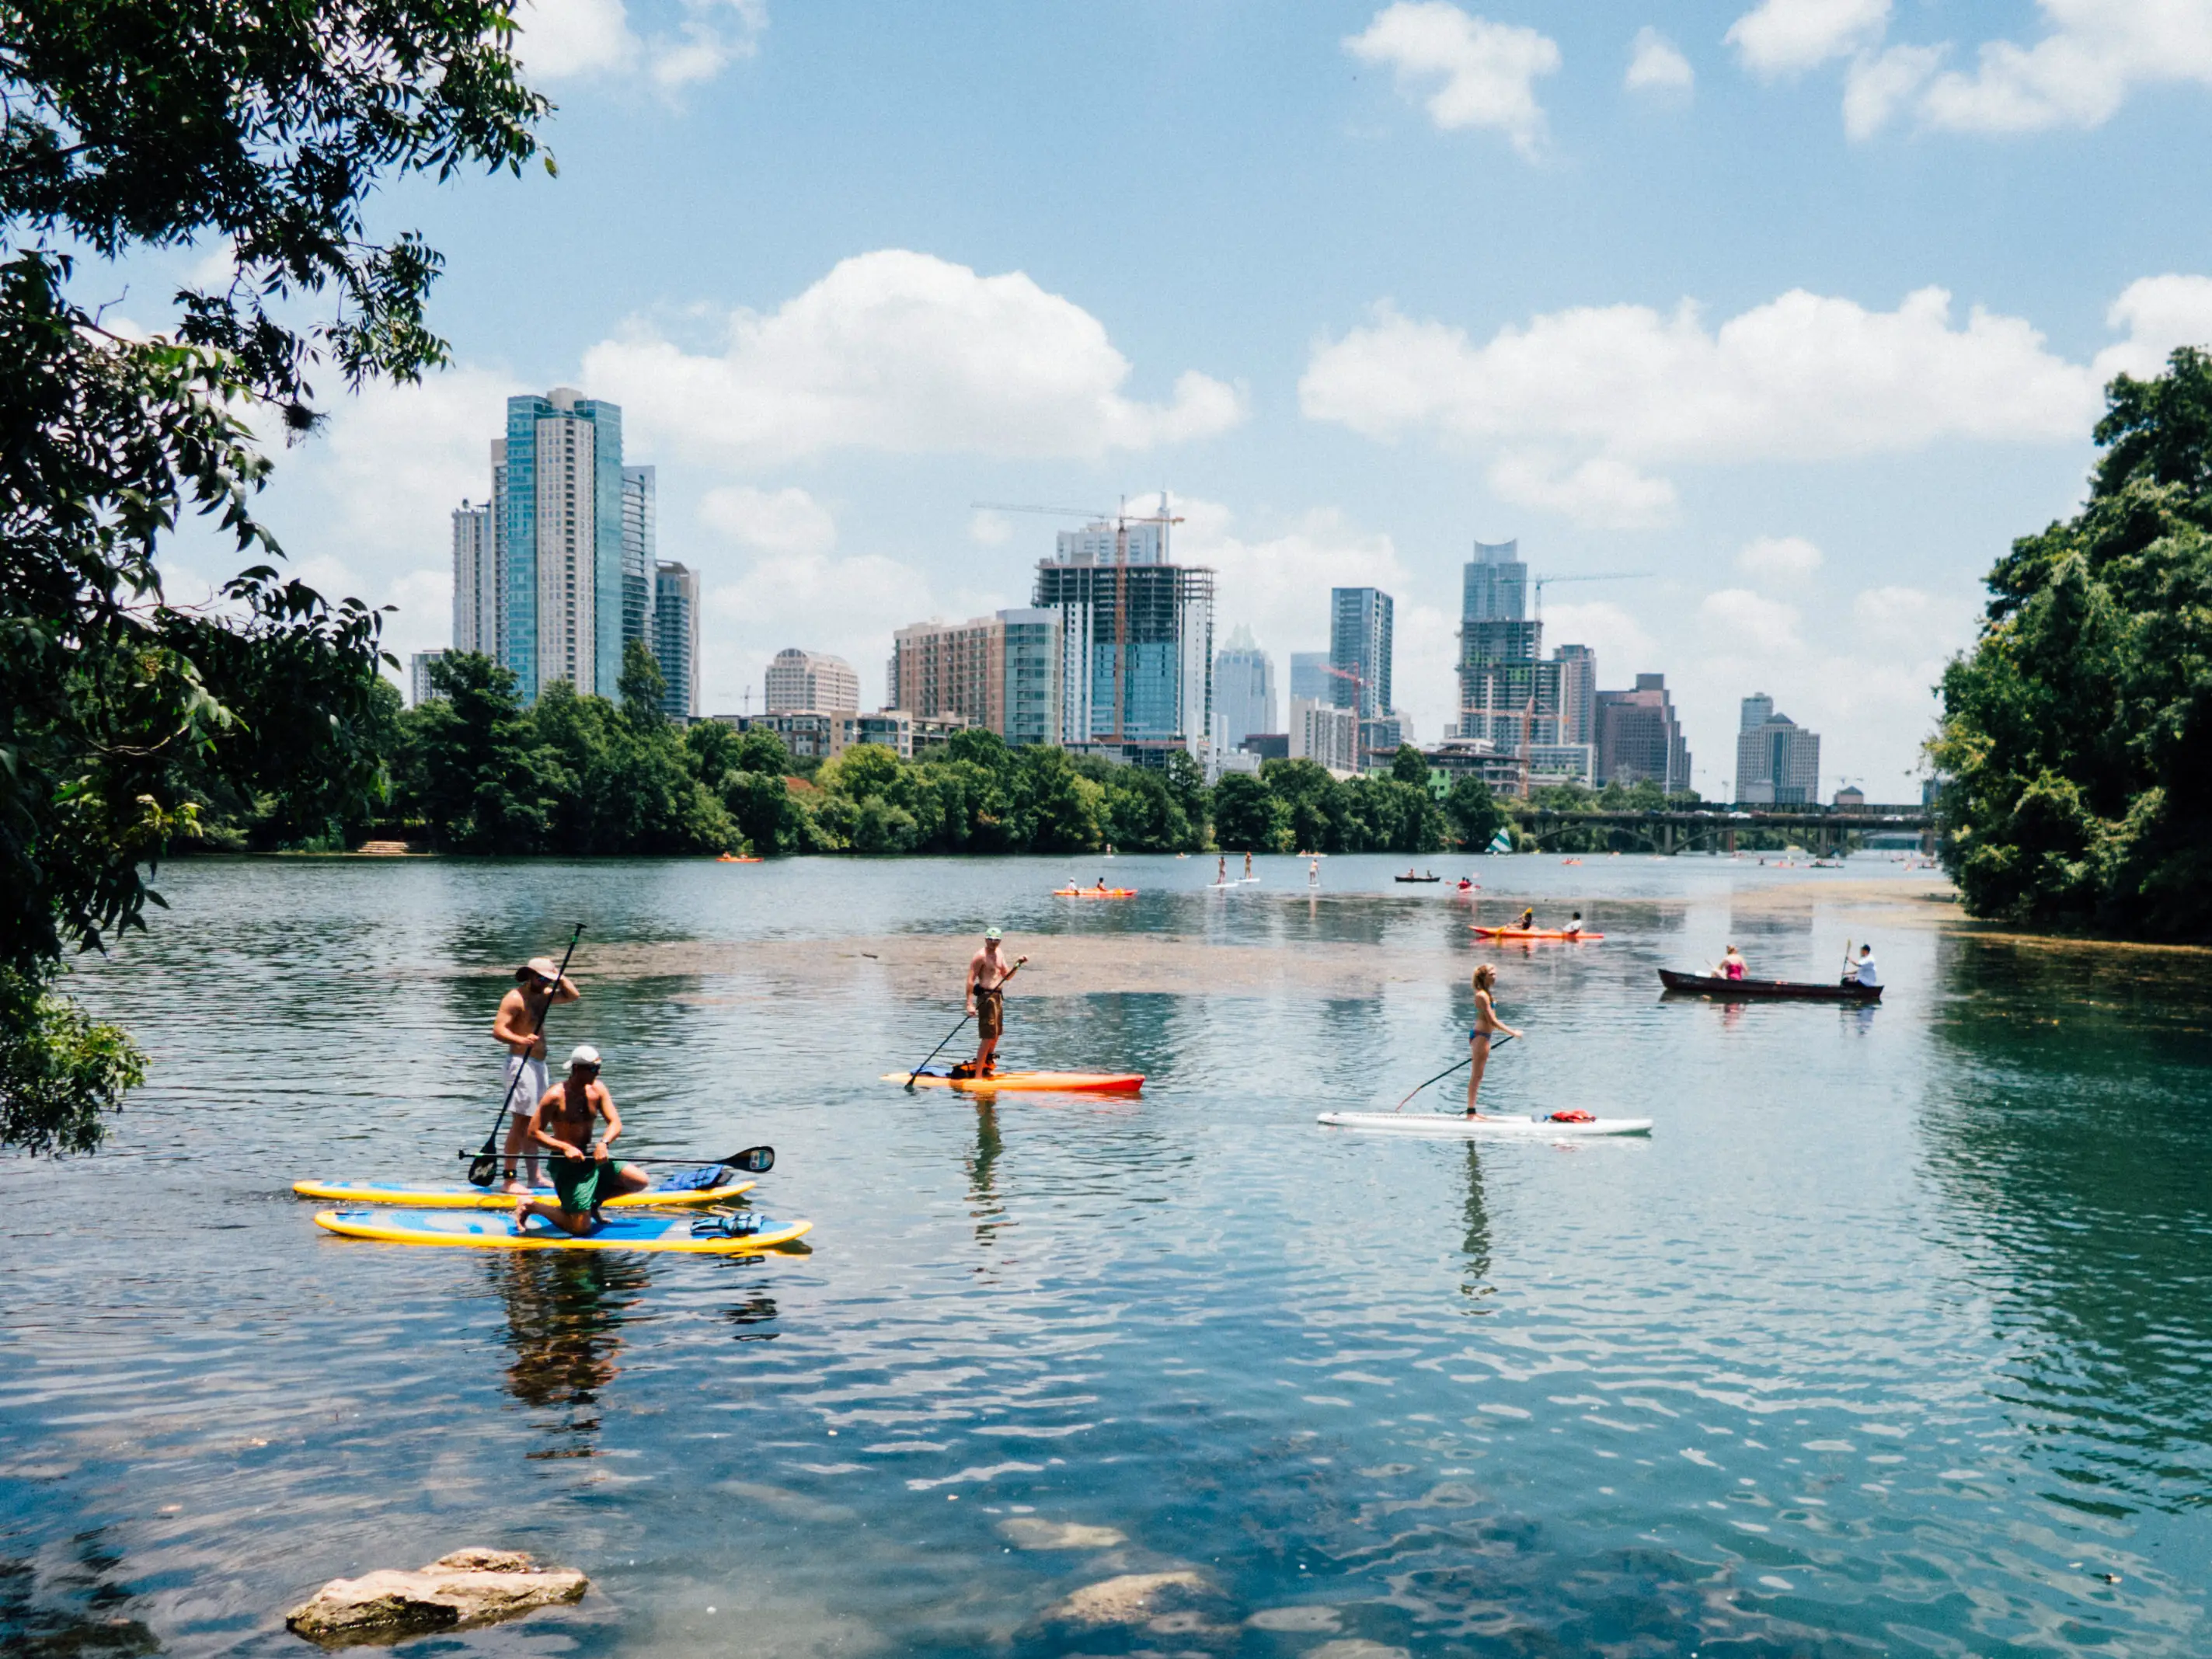 Stand up paddle board yoga with city views behind